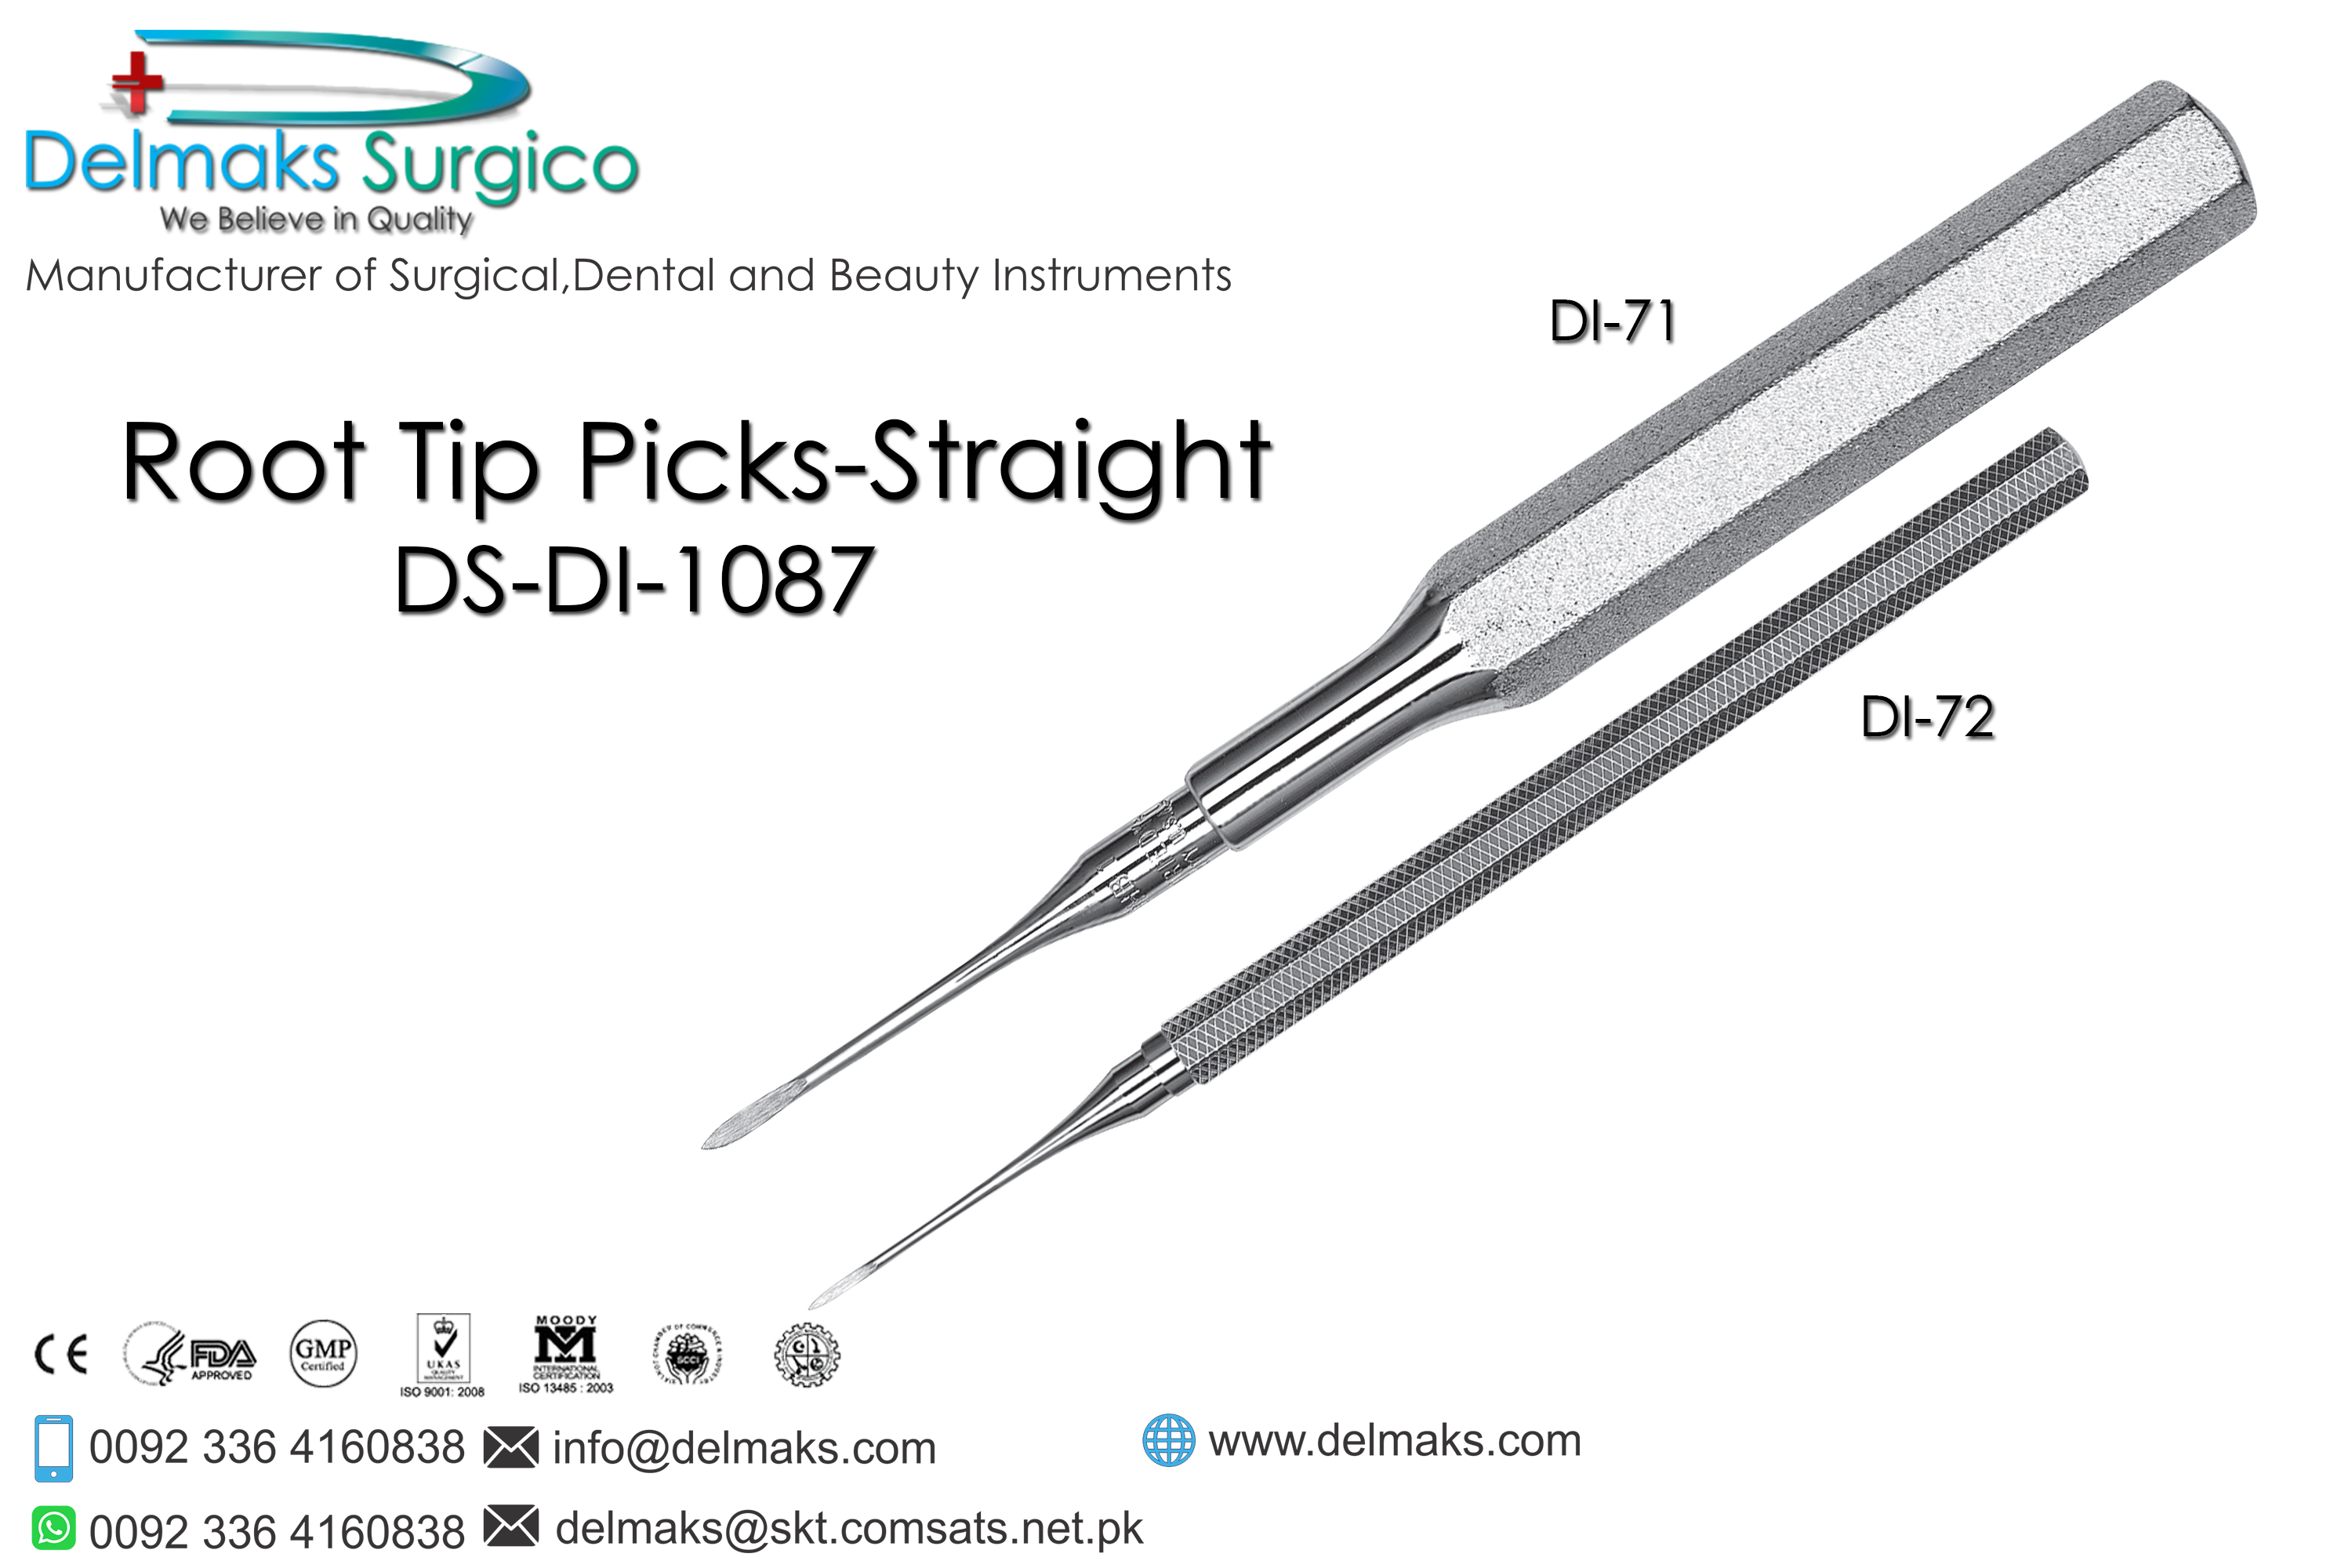 Root Tip Picks Straight-Oral And Maxillofacial Surgery Instruments-Dental Instruments-Delmaks Surgico